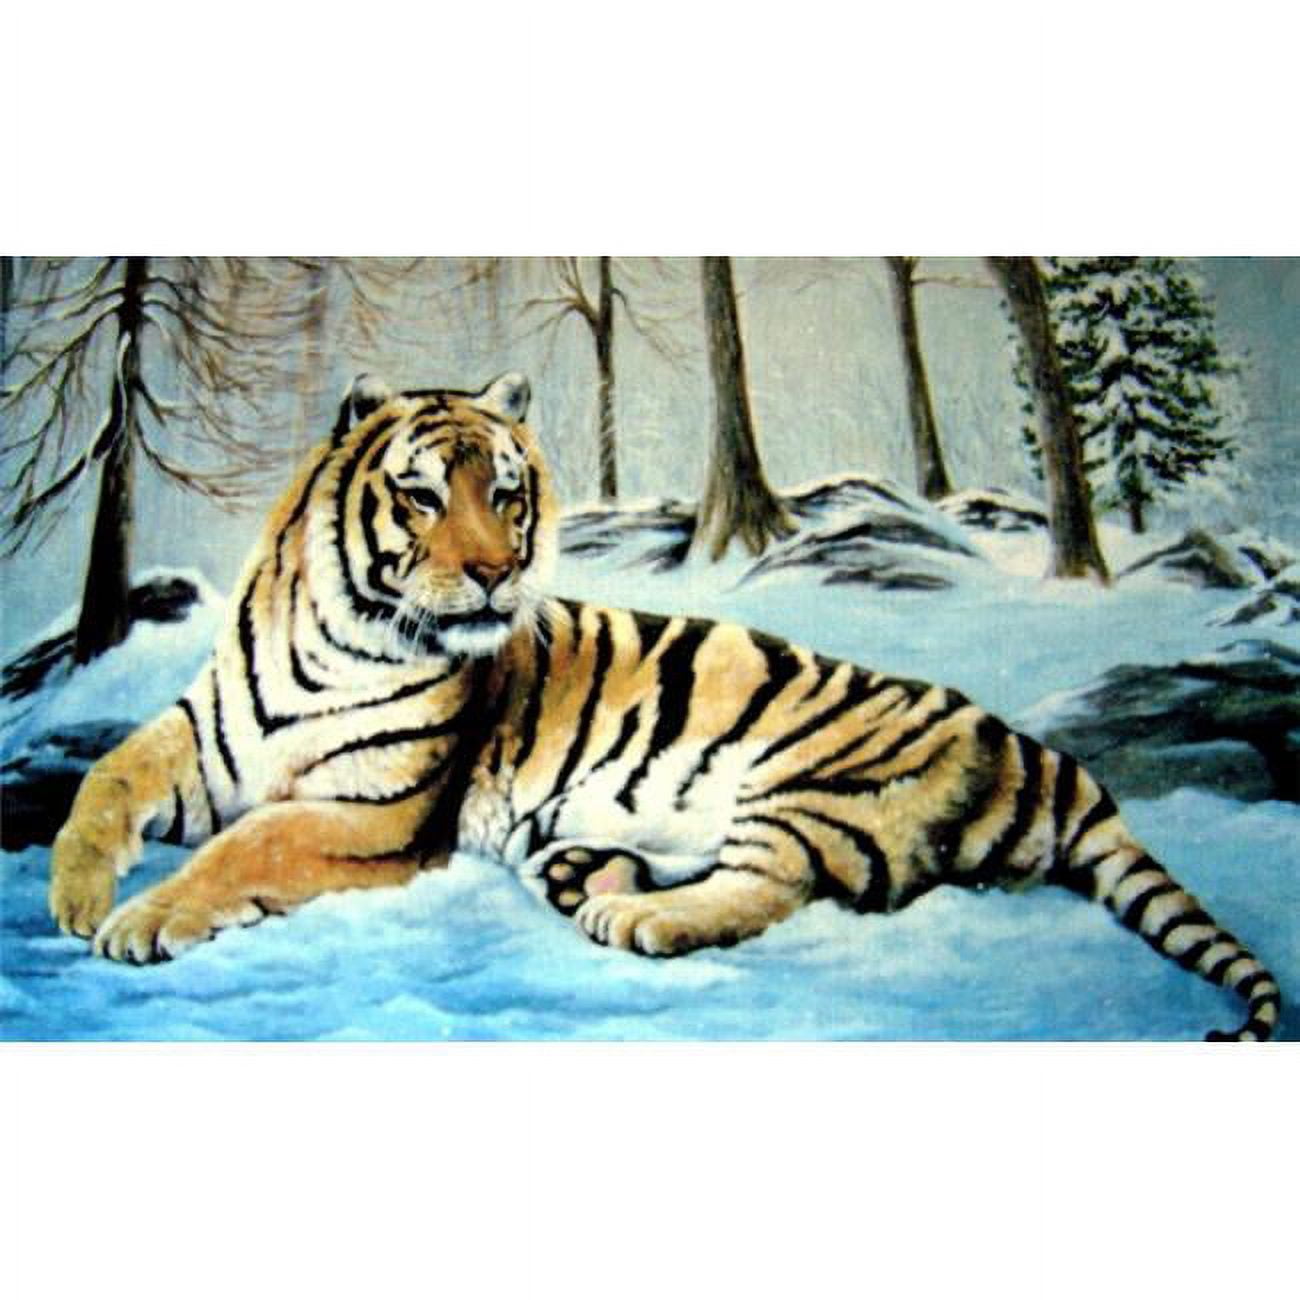 Awv082 Tiger 18 X 30 In. Doormat Rug - Blue, Gold & Yellow, Yellow